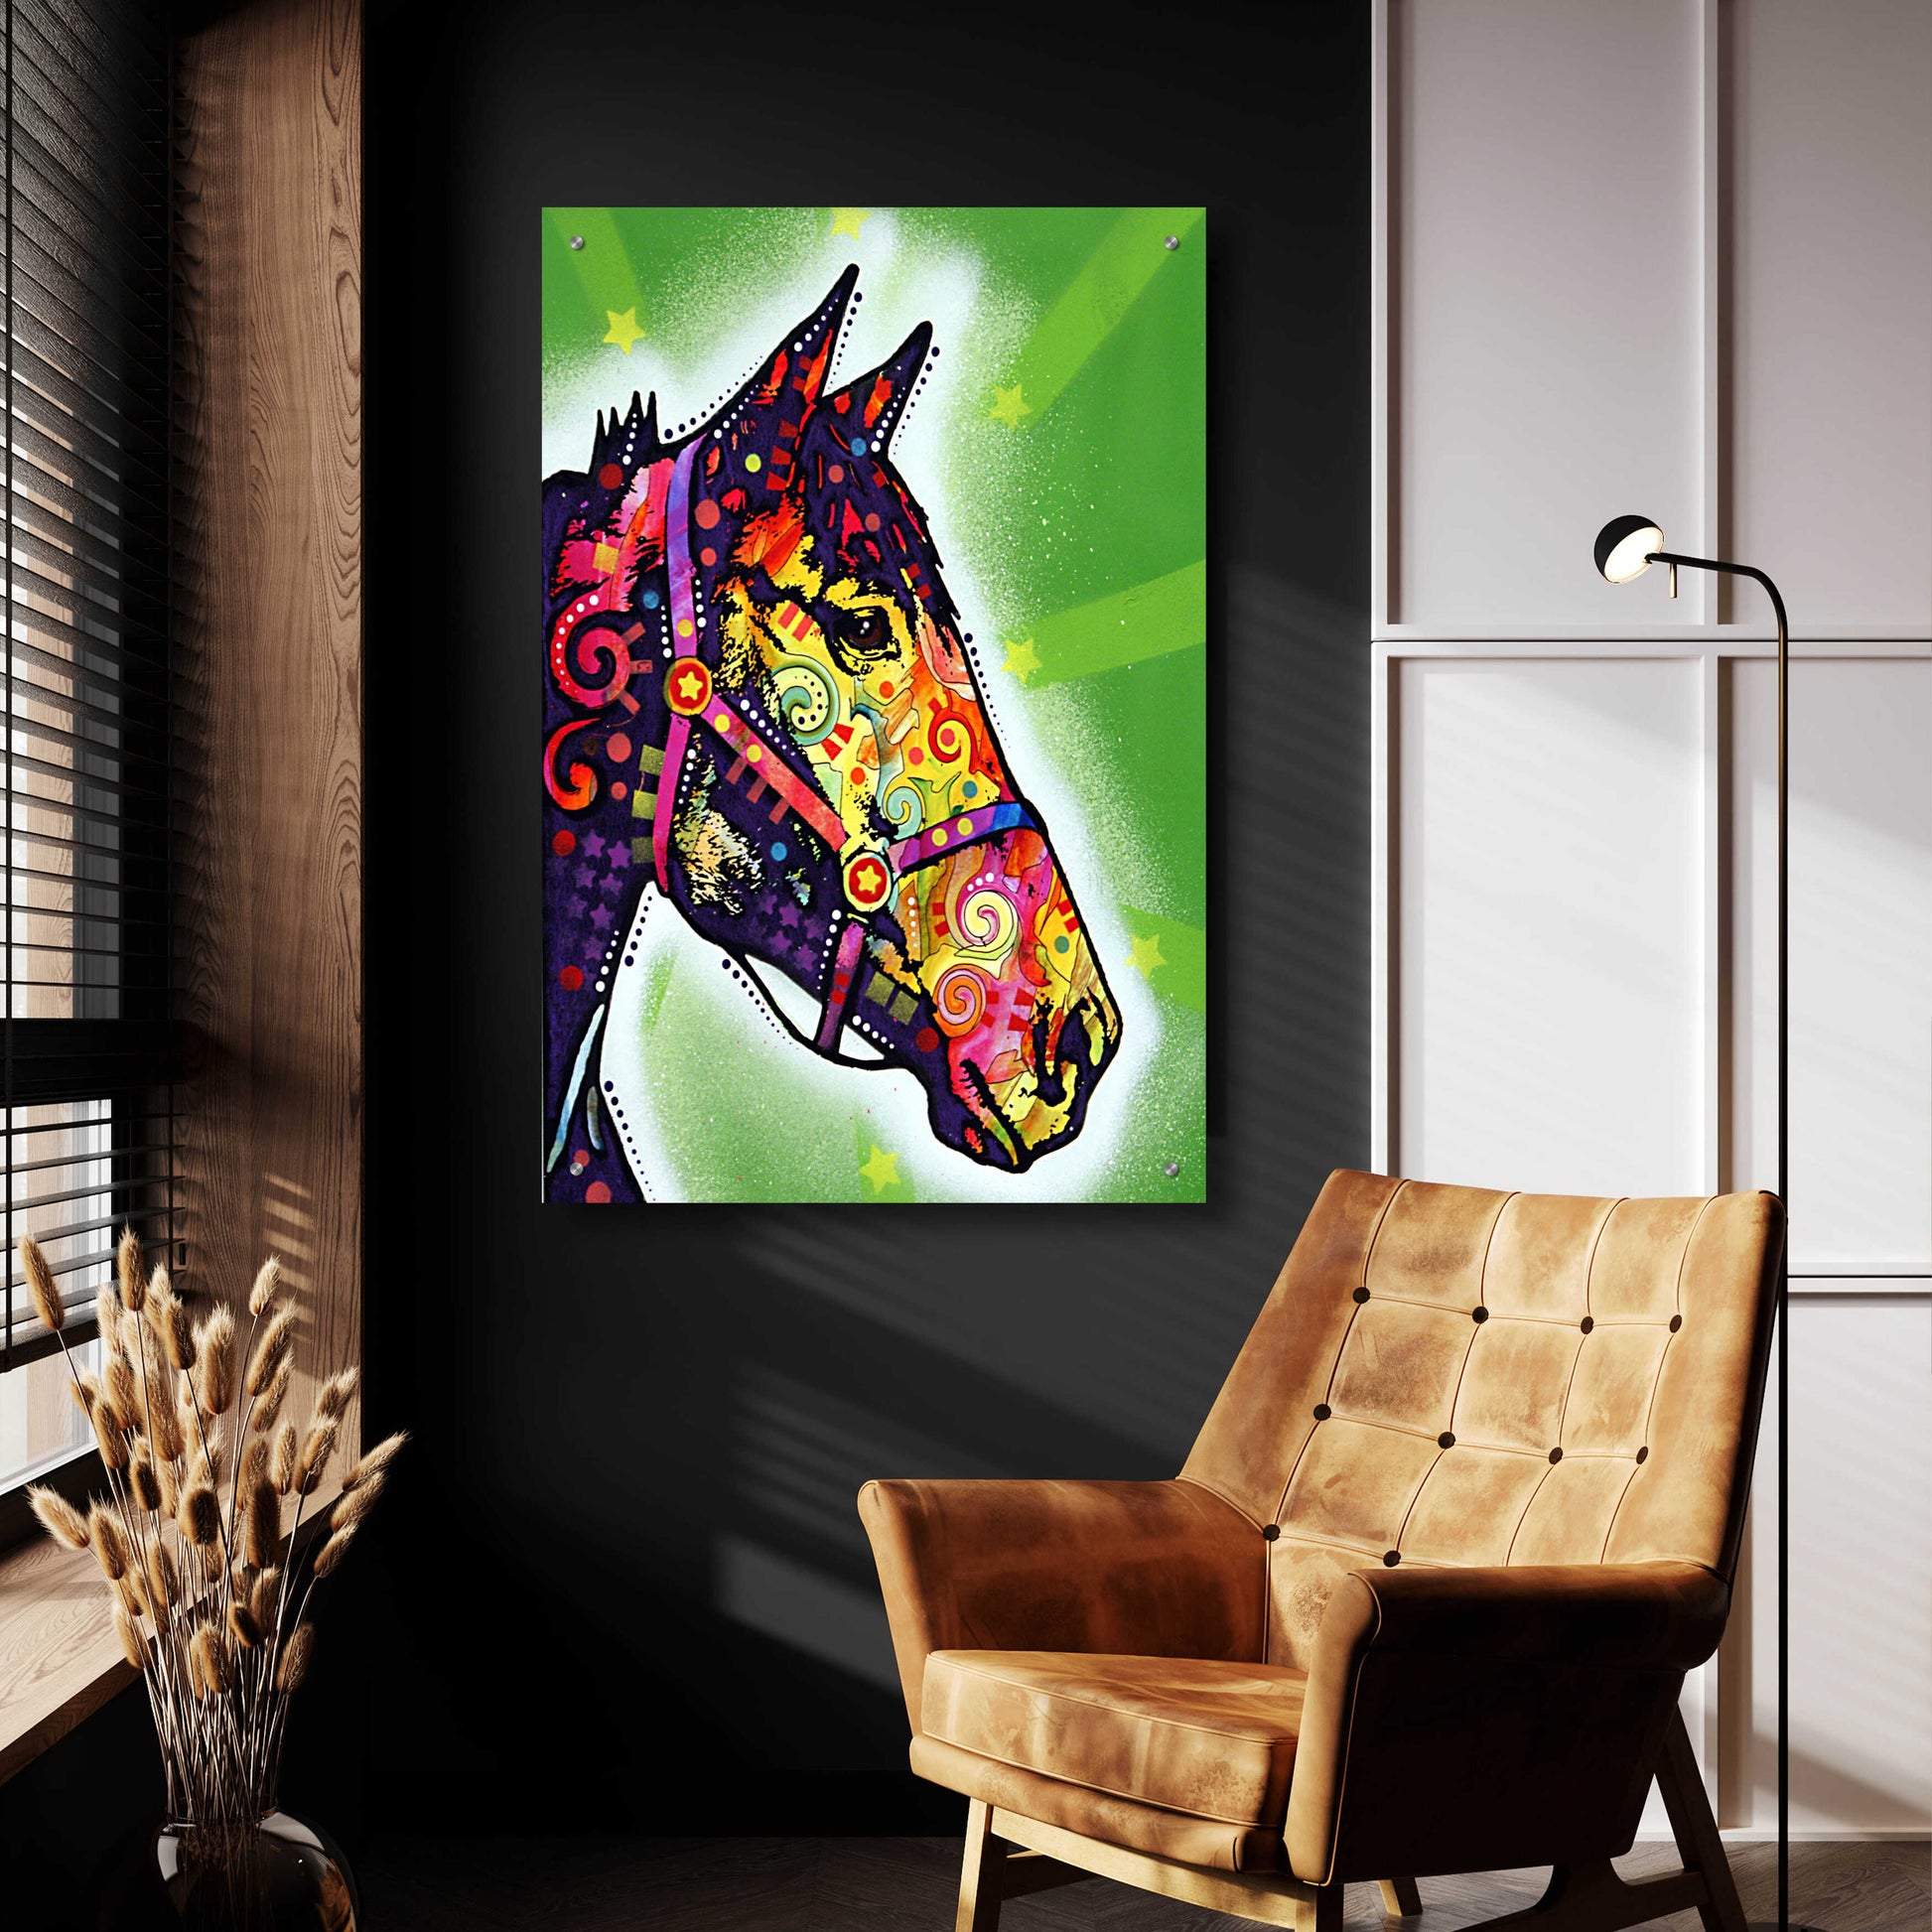 Epic Art 'Horse 2' by Dean Russo, Acrylic Glass Wall Art,24x36